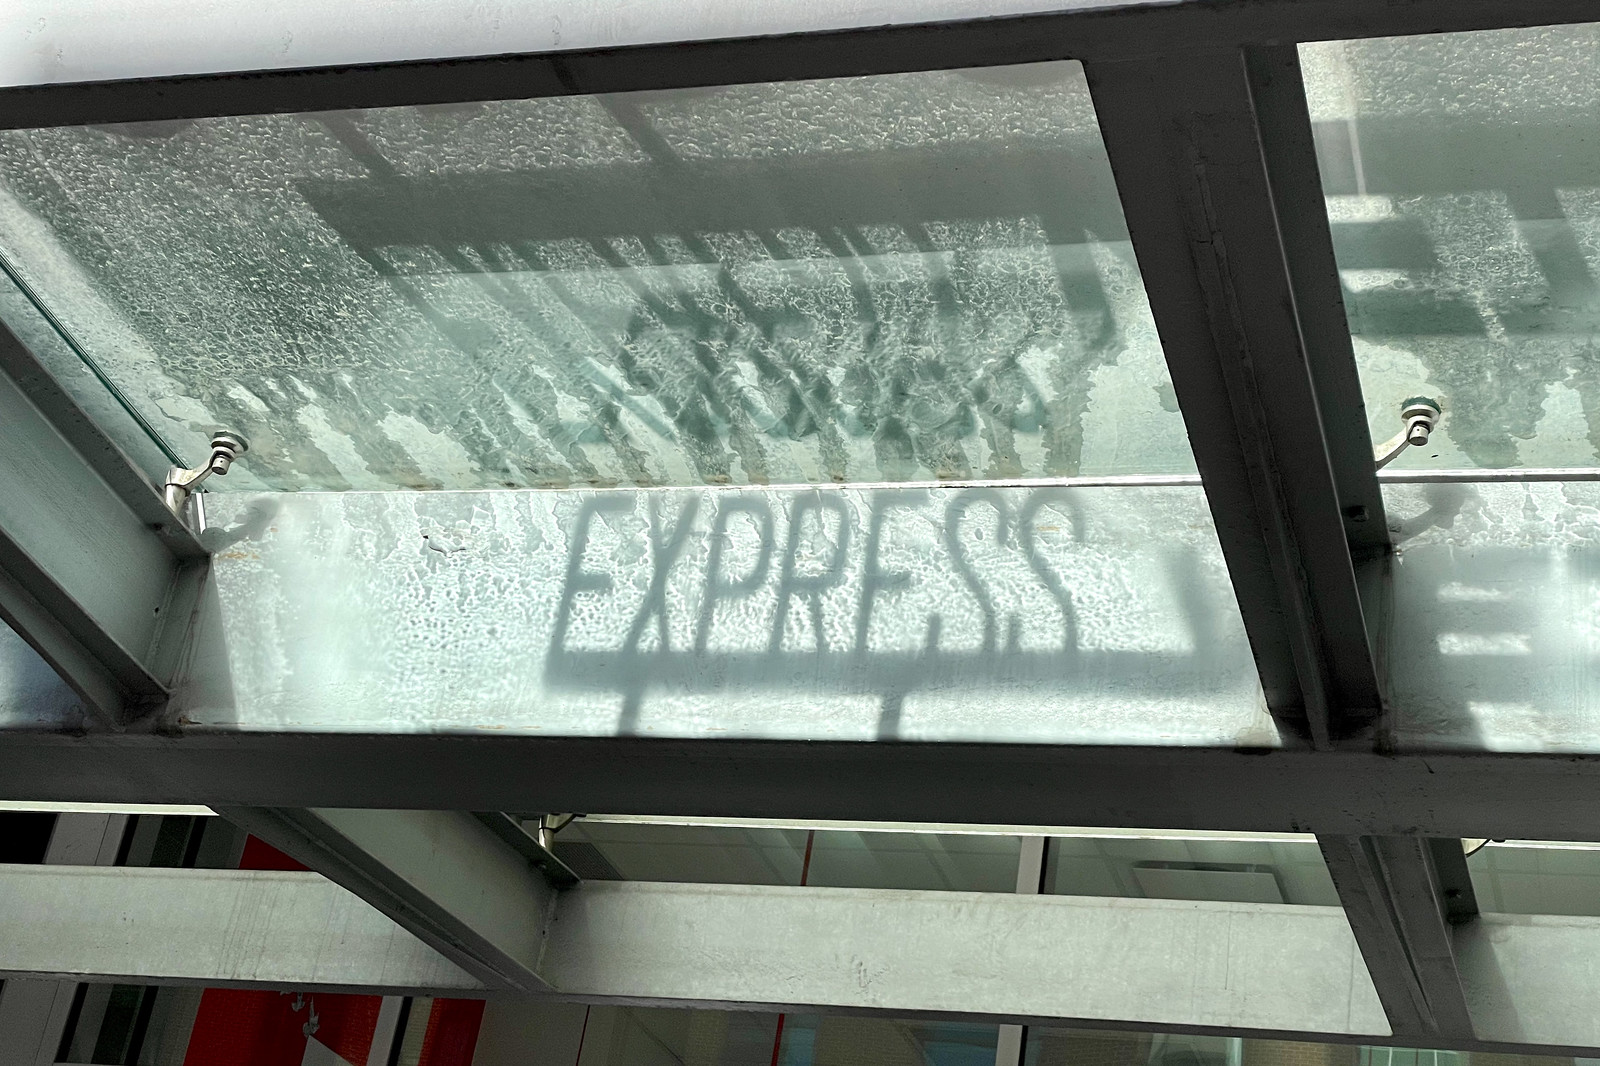 Shadow express